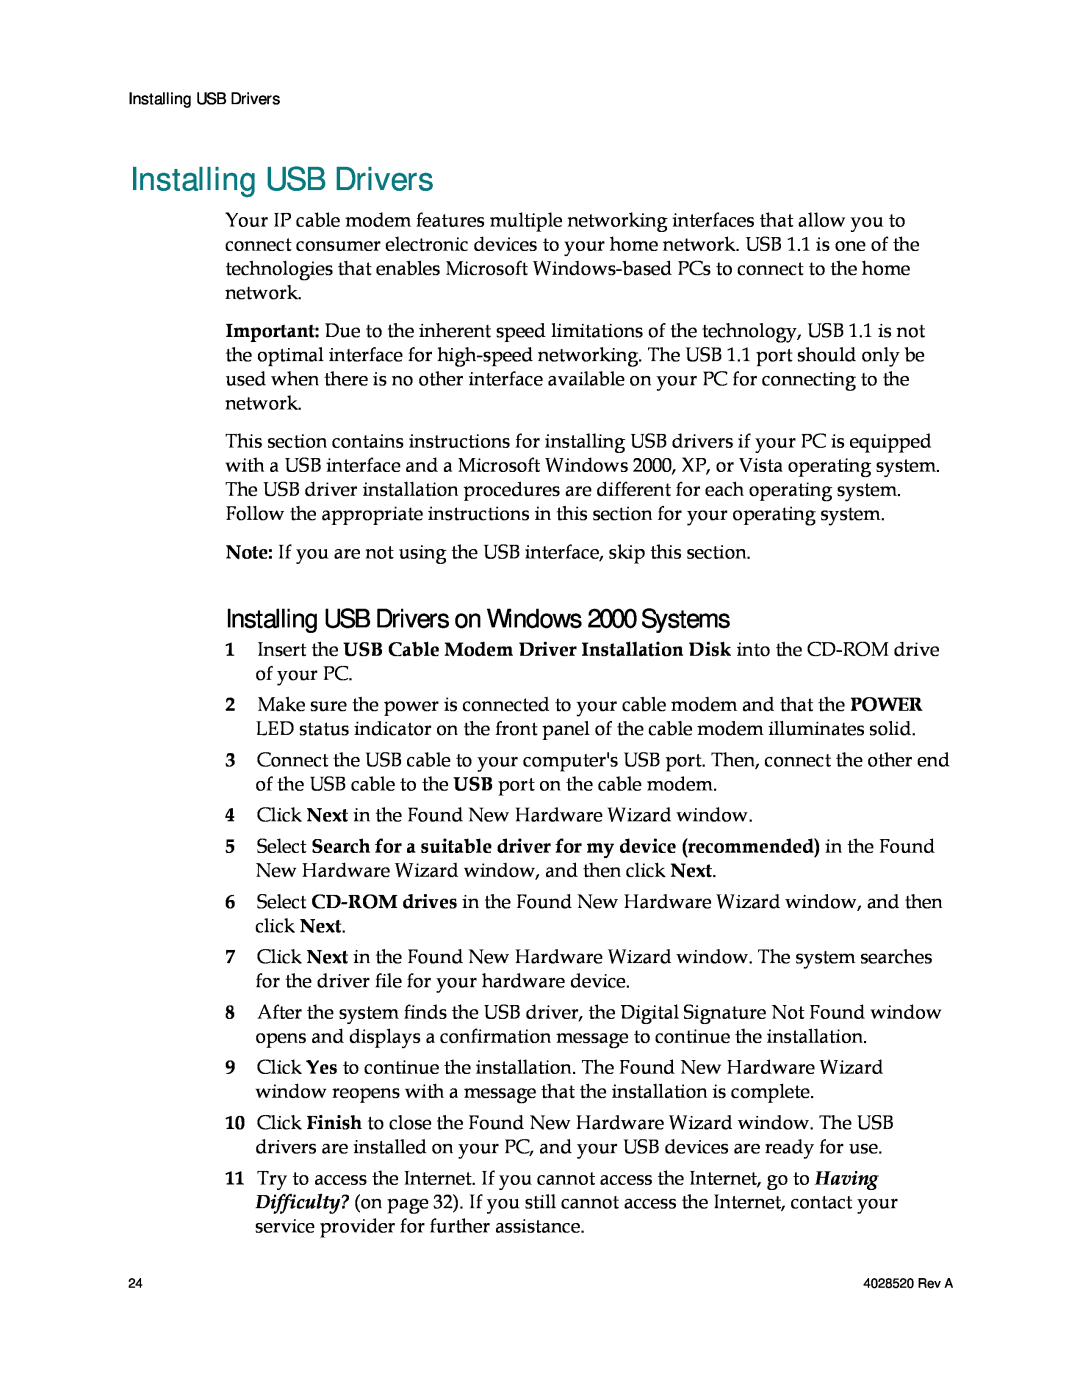 Cisco Systems DPQ2202 important safety instructions Installing USB Drivers on Windows 2000 Systems 